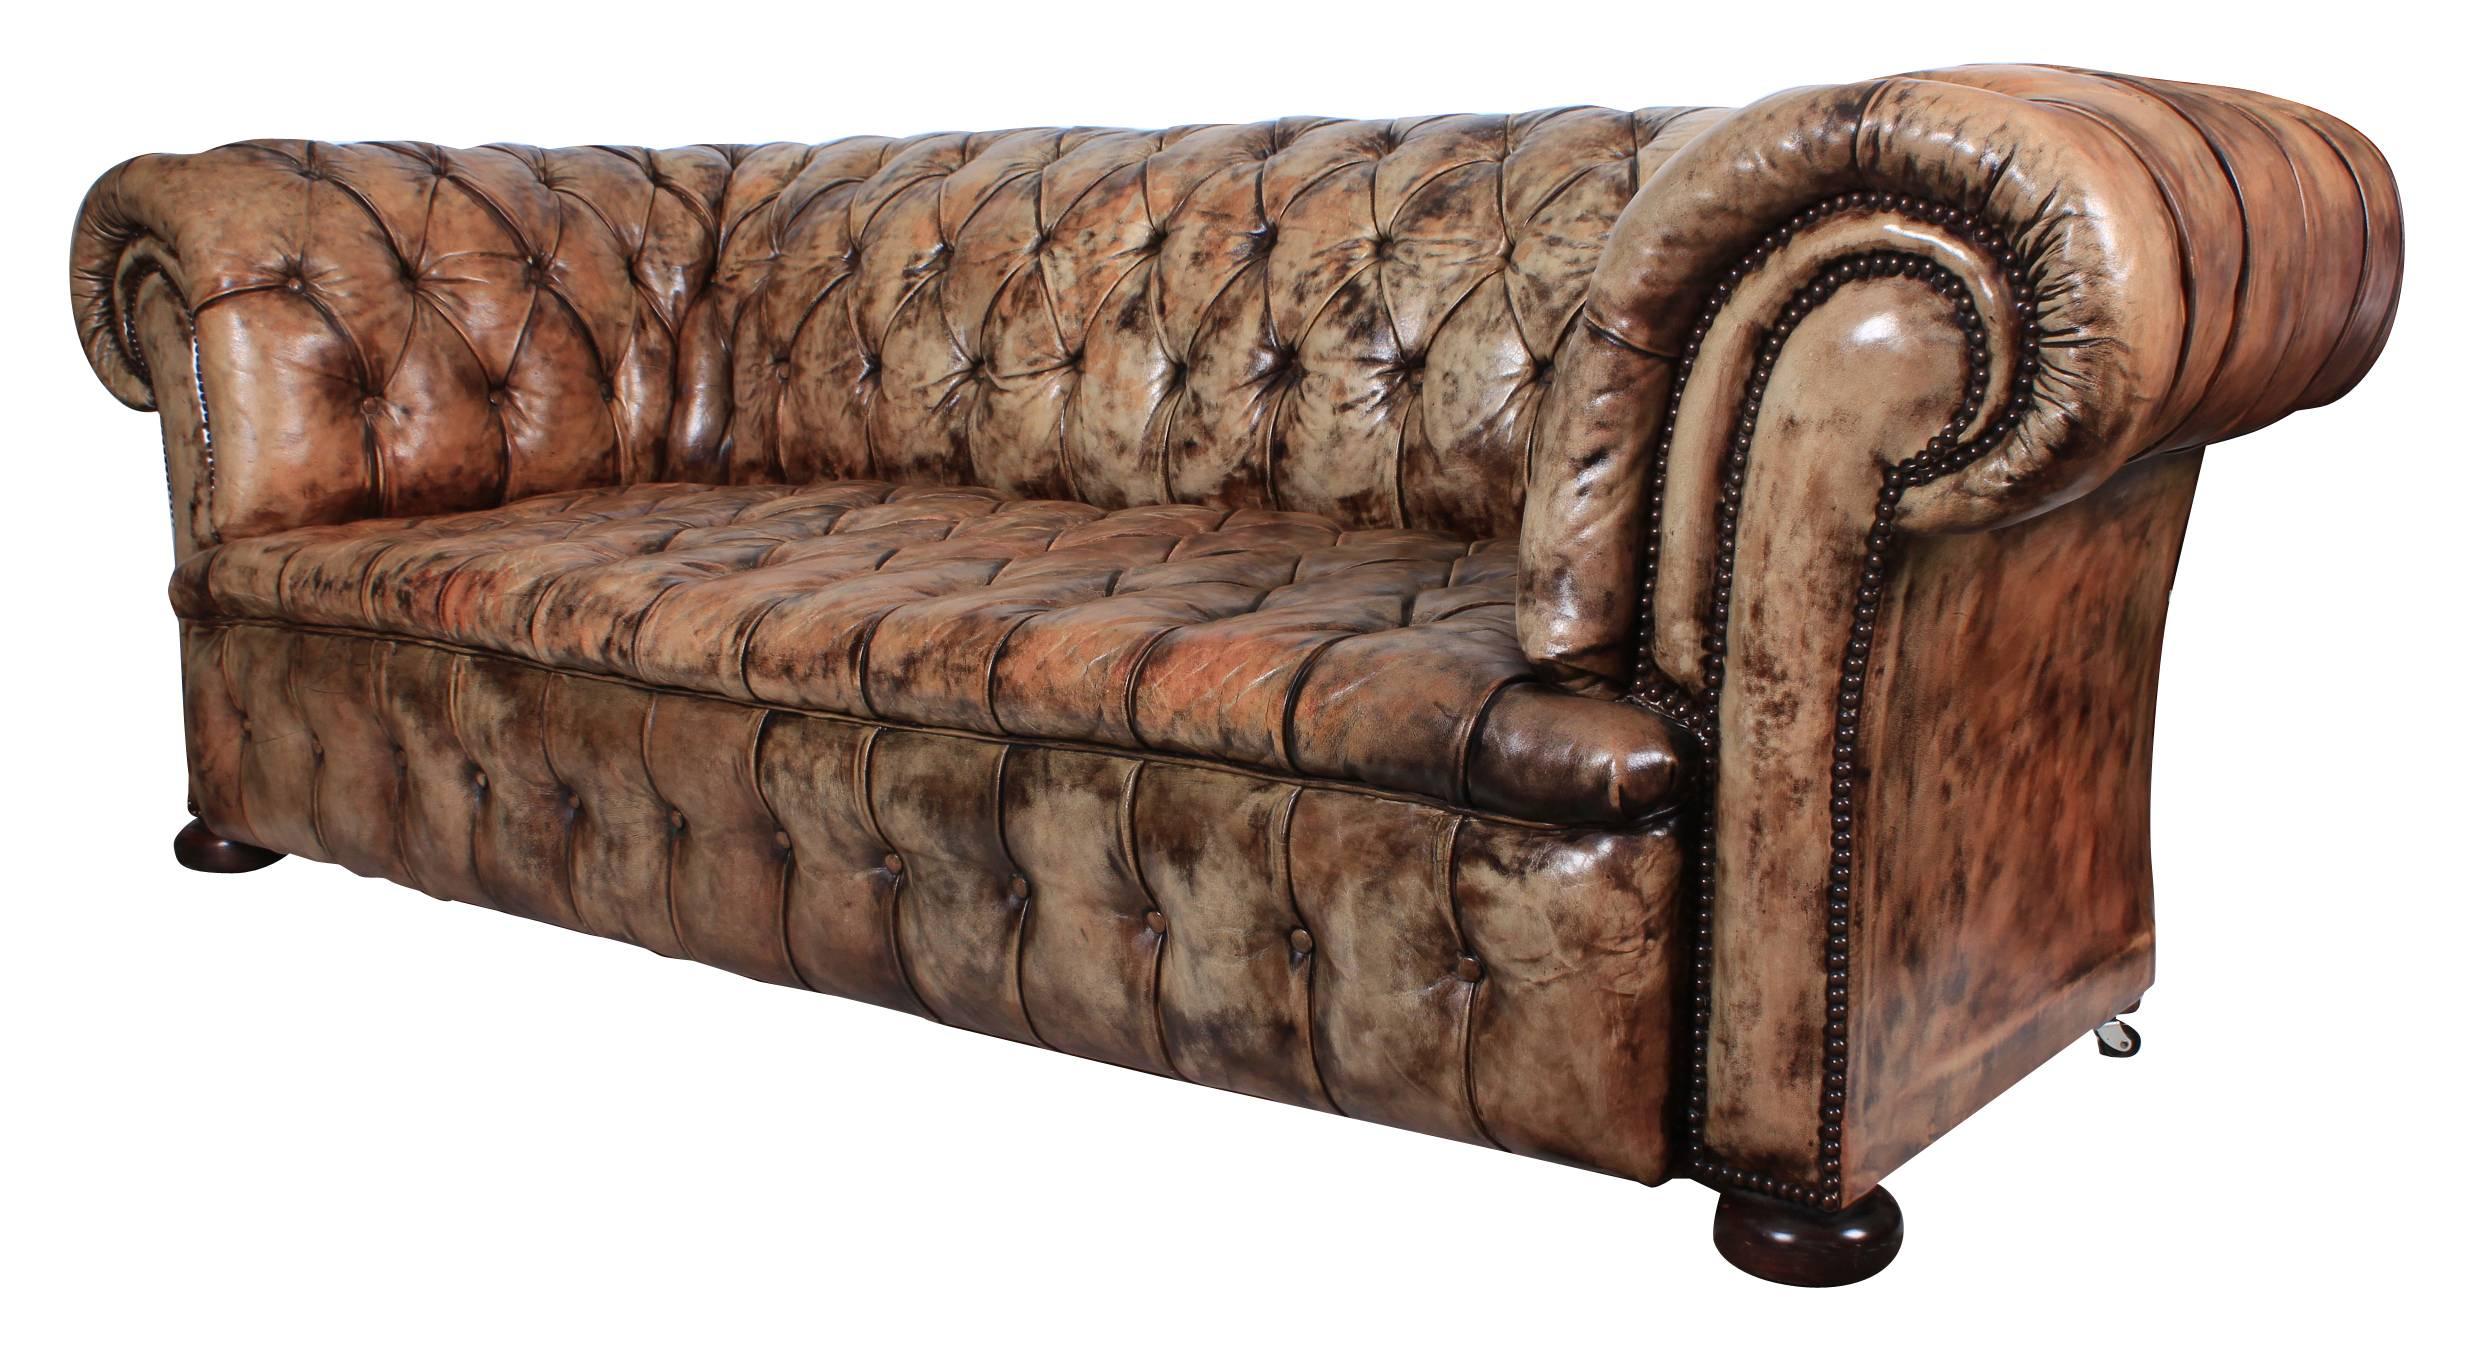 British Vintage Green/Tan Leather Chesterfield Sofa For Sale